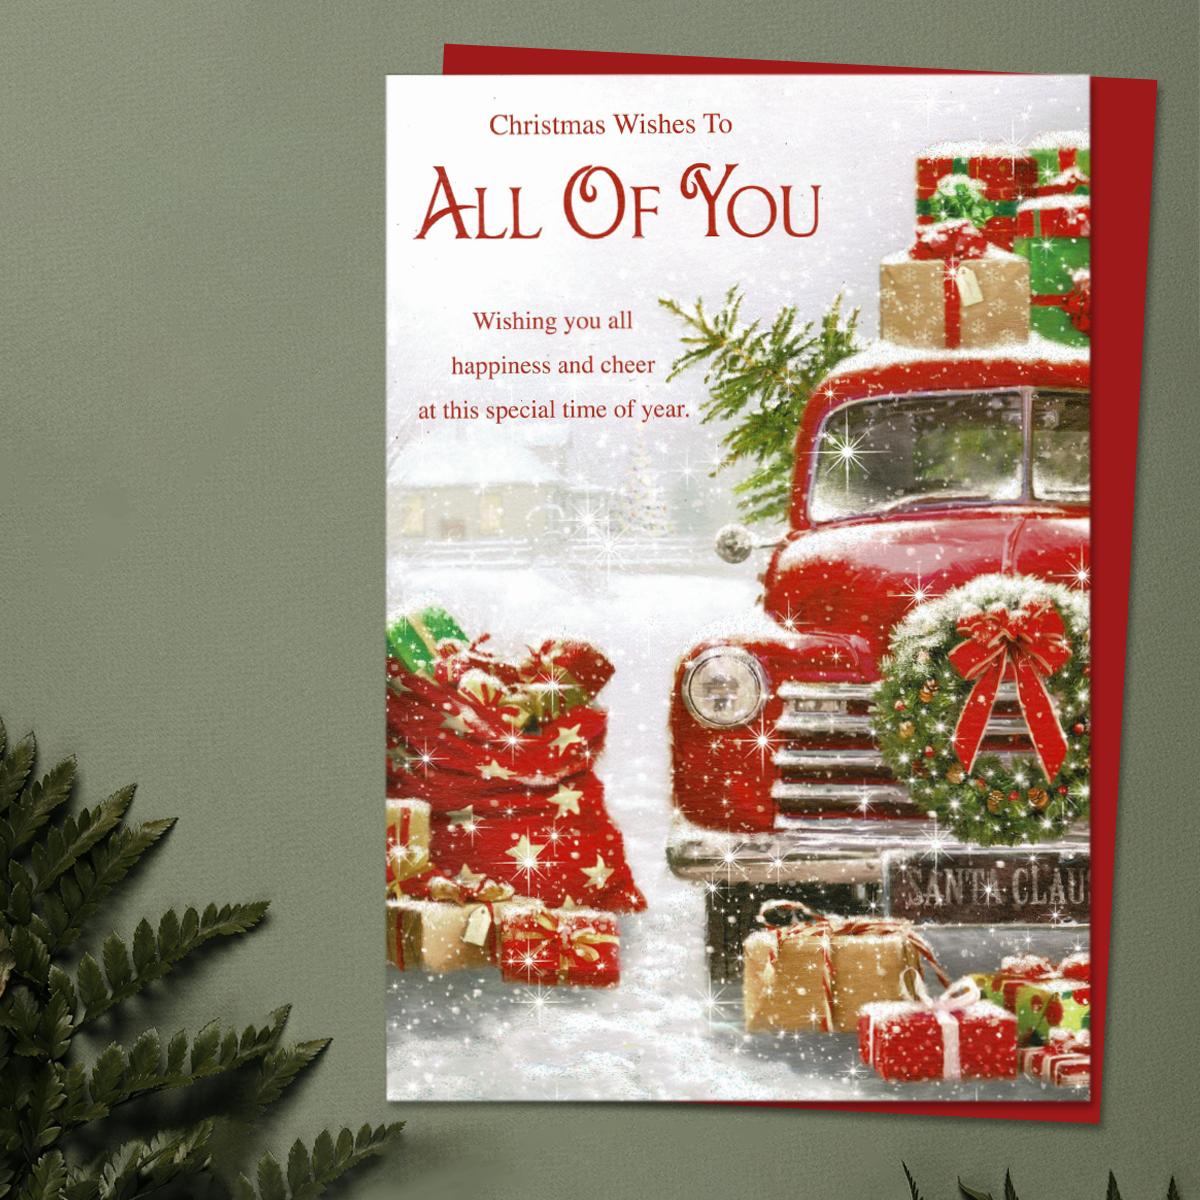 All Of You Santa Claus Car Card Front Image